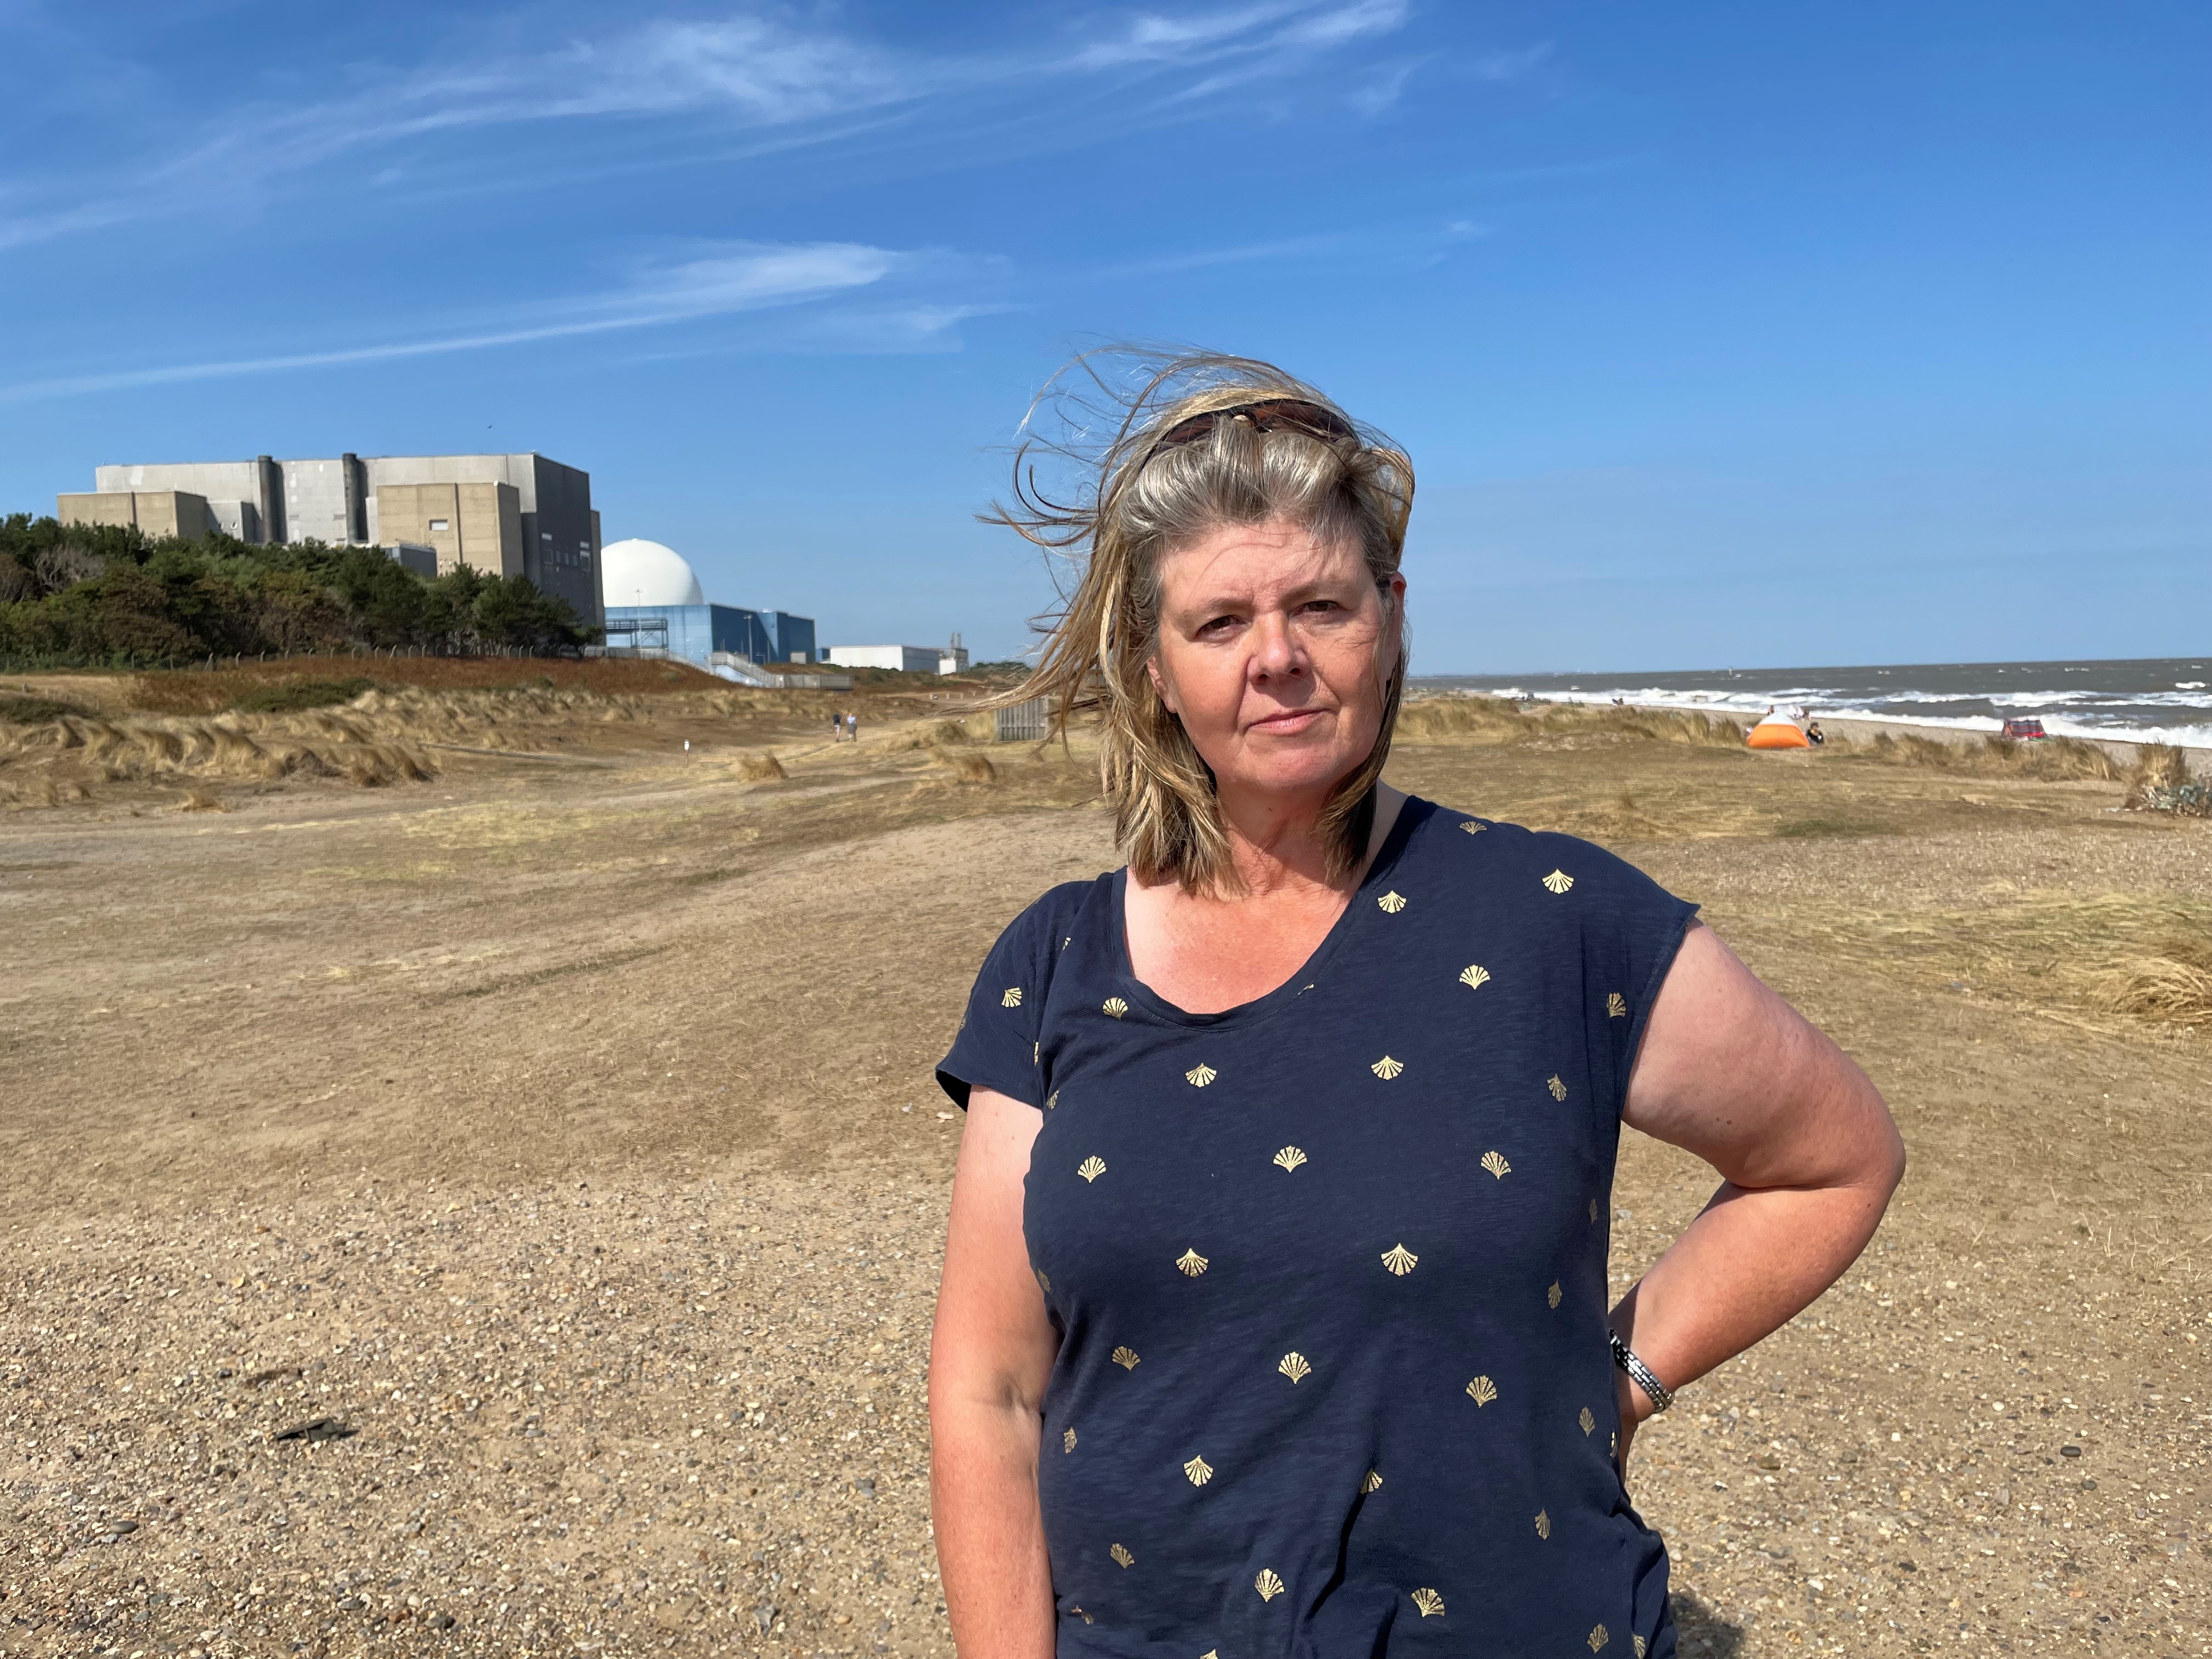 Alison Downes, of Stop Sizewell C, said Boris Johnson's visit to the site 'may turn out to be the kiss of death for Sizewell C'. (Sam Russell/ PA)